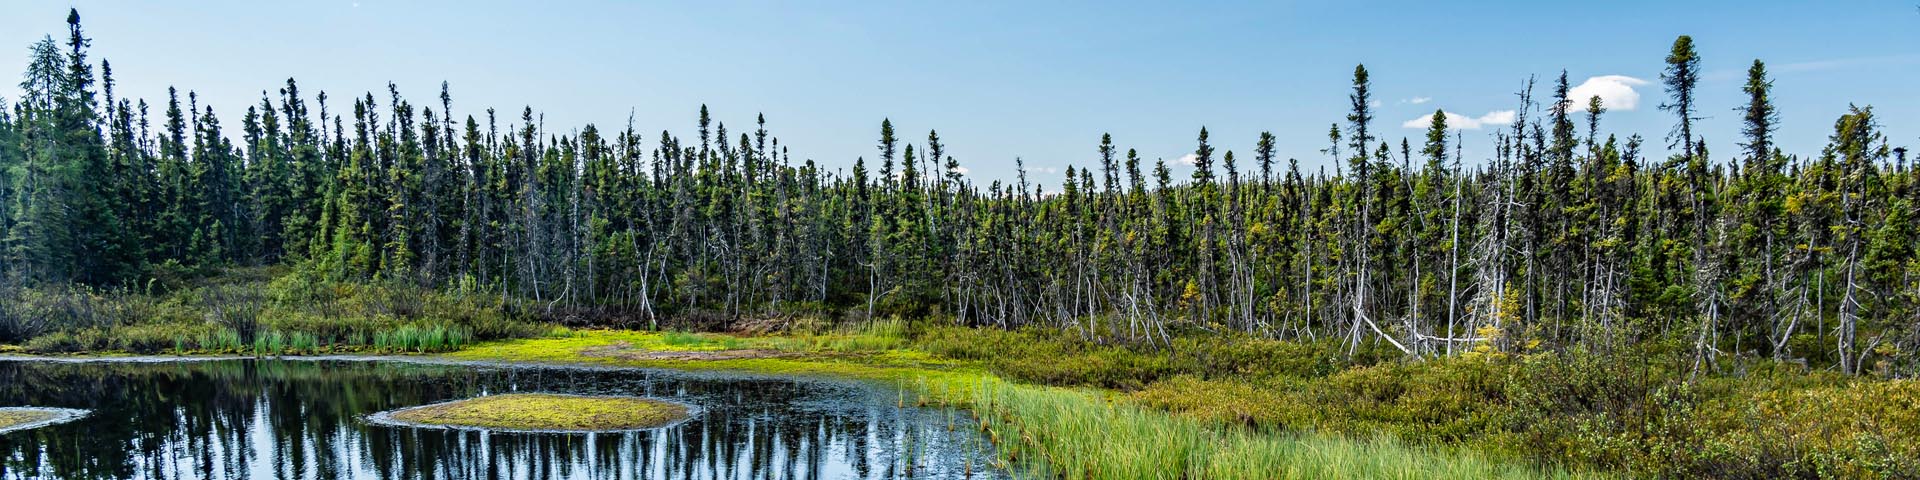 Coniferous forest lining the edge of a wetland.